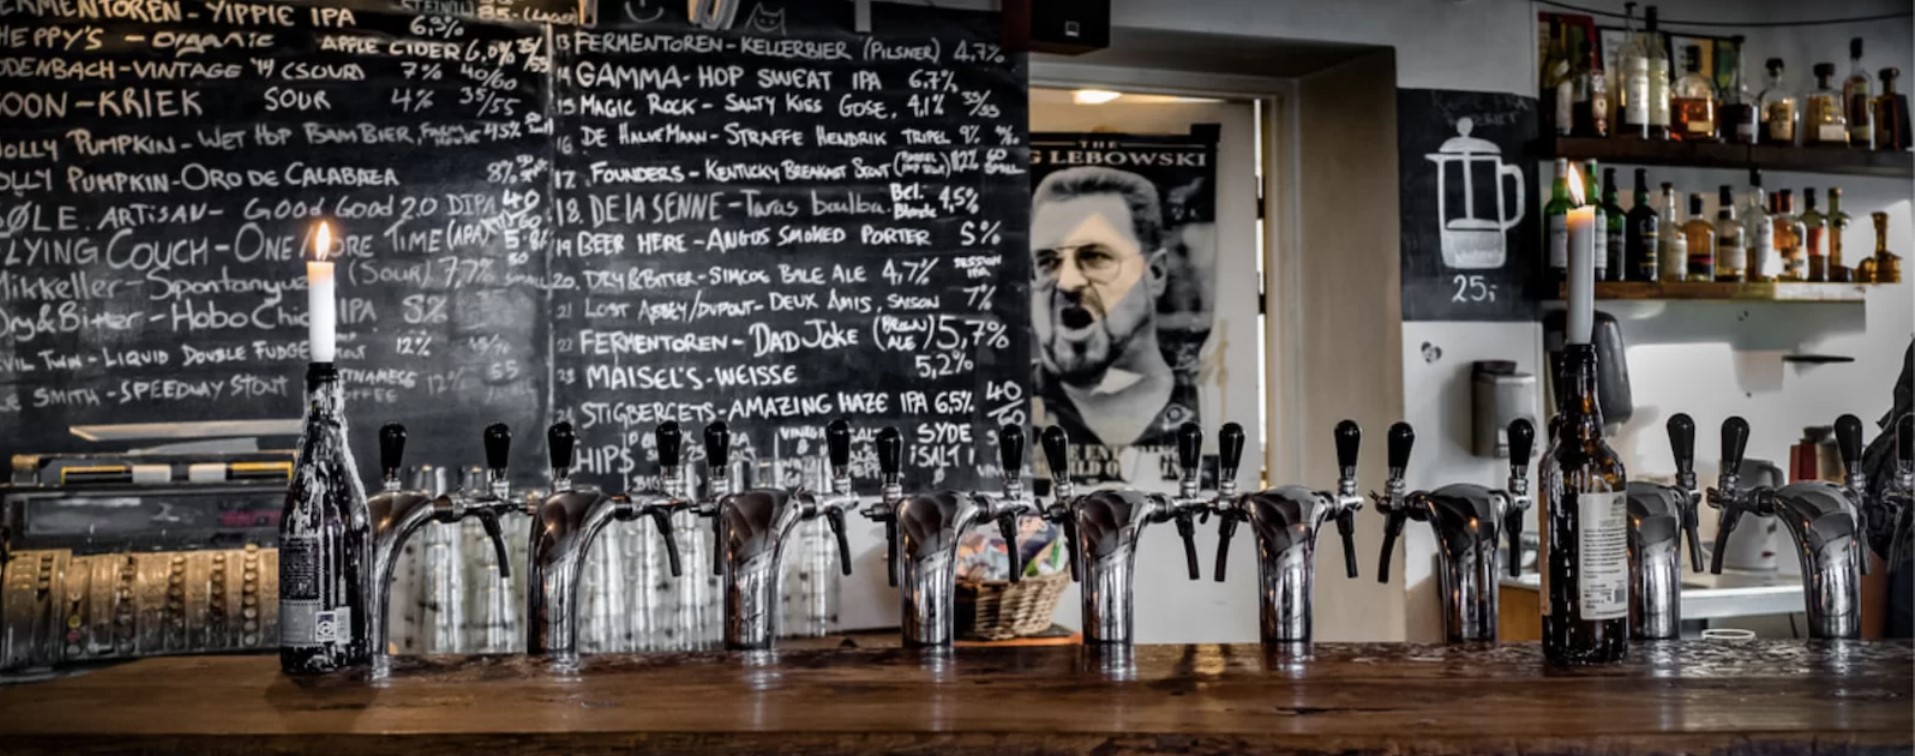 A bar photo of Fermentøren's bar | The Best Beer Bars in Copenhagen: Our Top 4 Favorite | Amitylux Tours | Scandinavian Guided Tours | VIP & Luxury Experiences in the Nordics